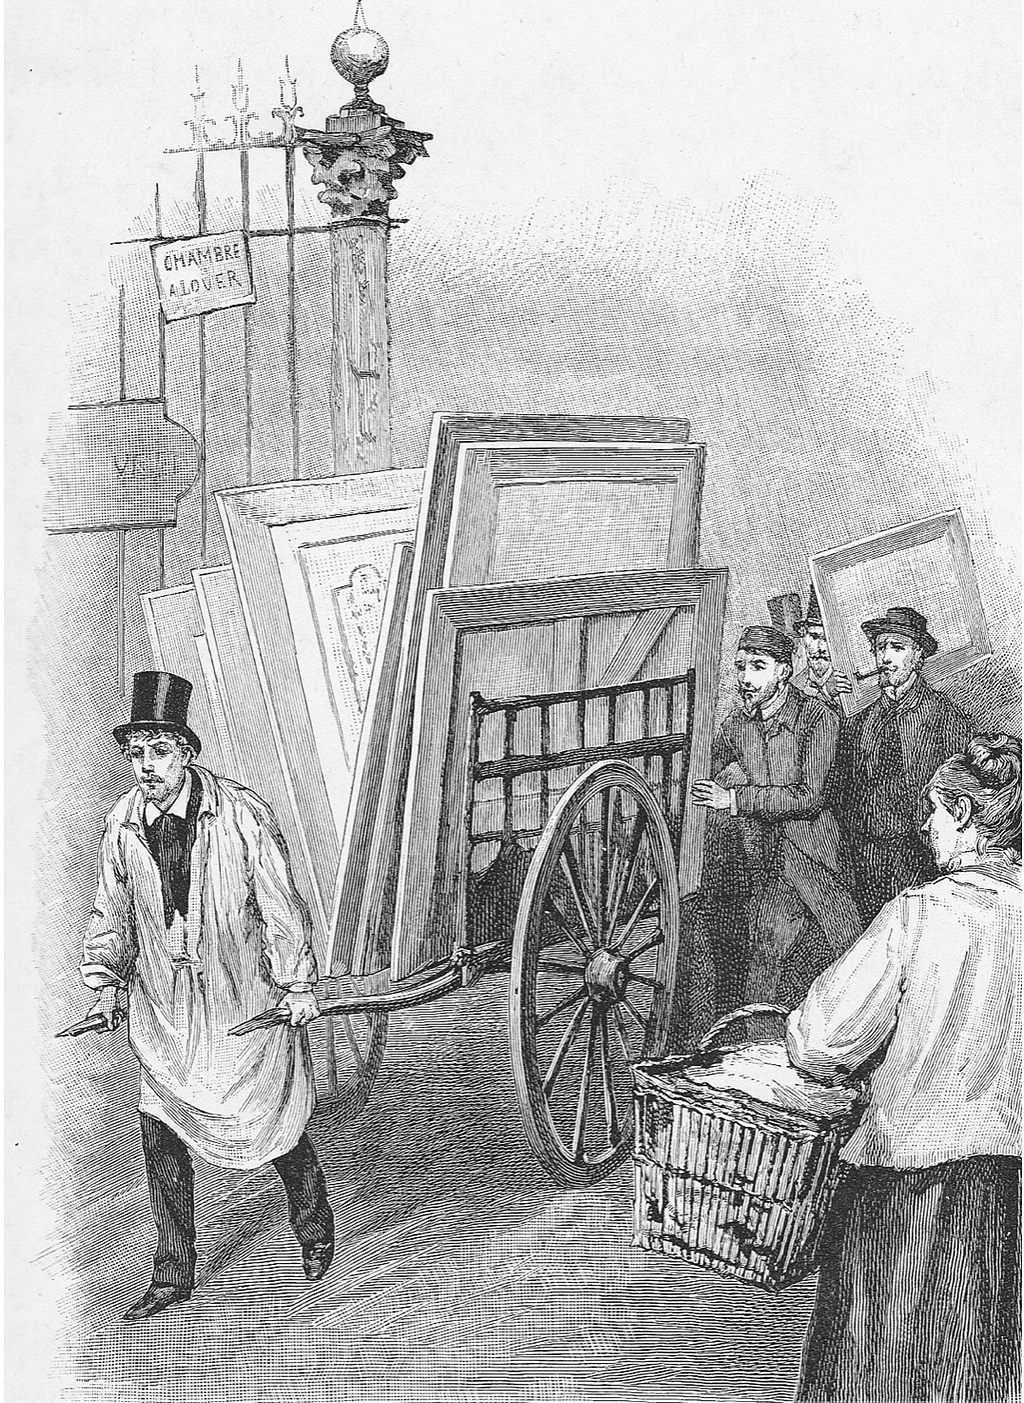 Engraving of cart being pulled, piled up with architectural drawings